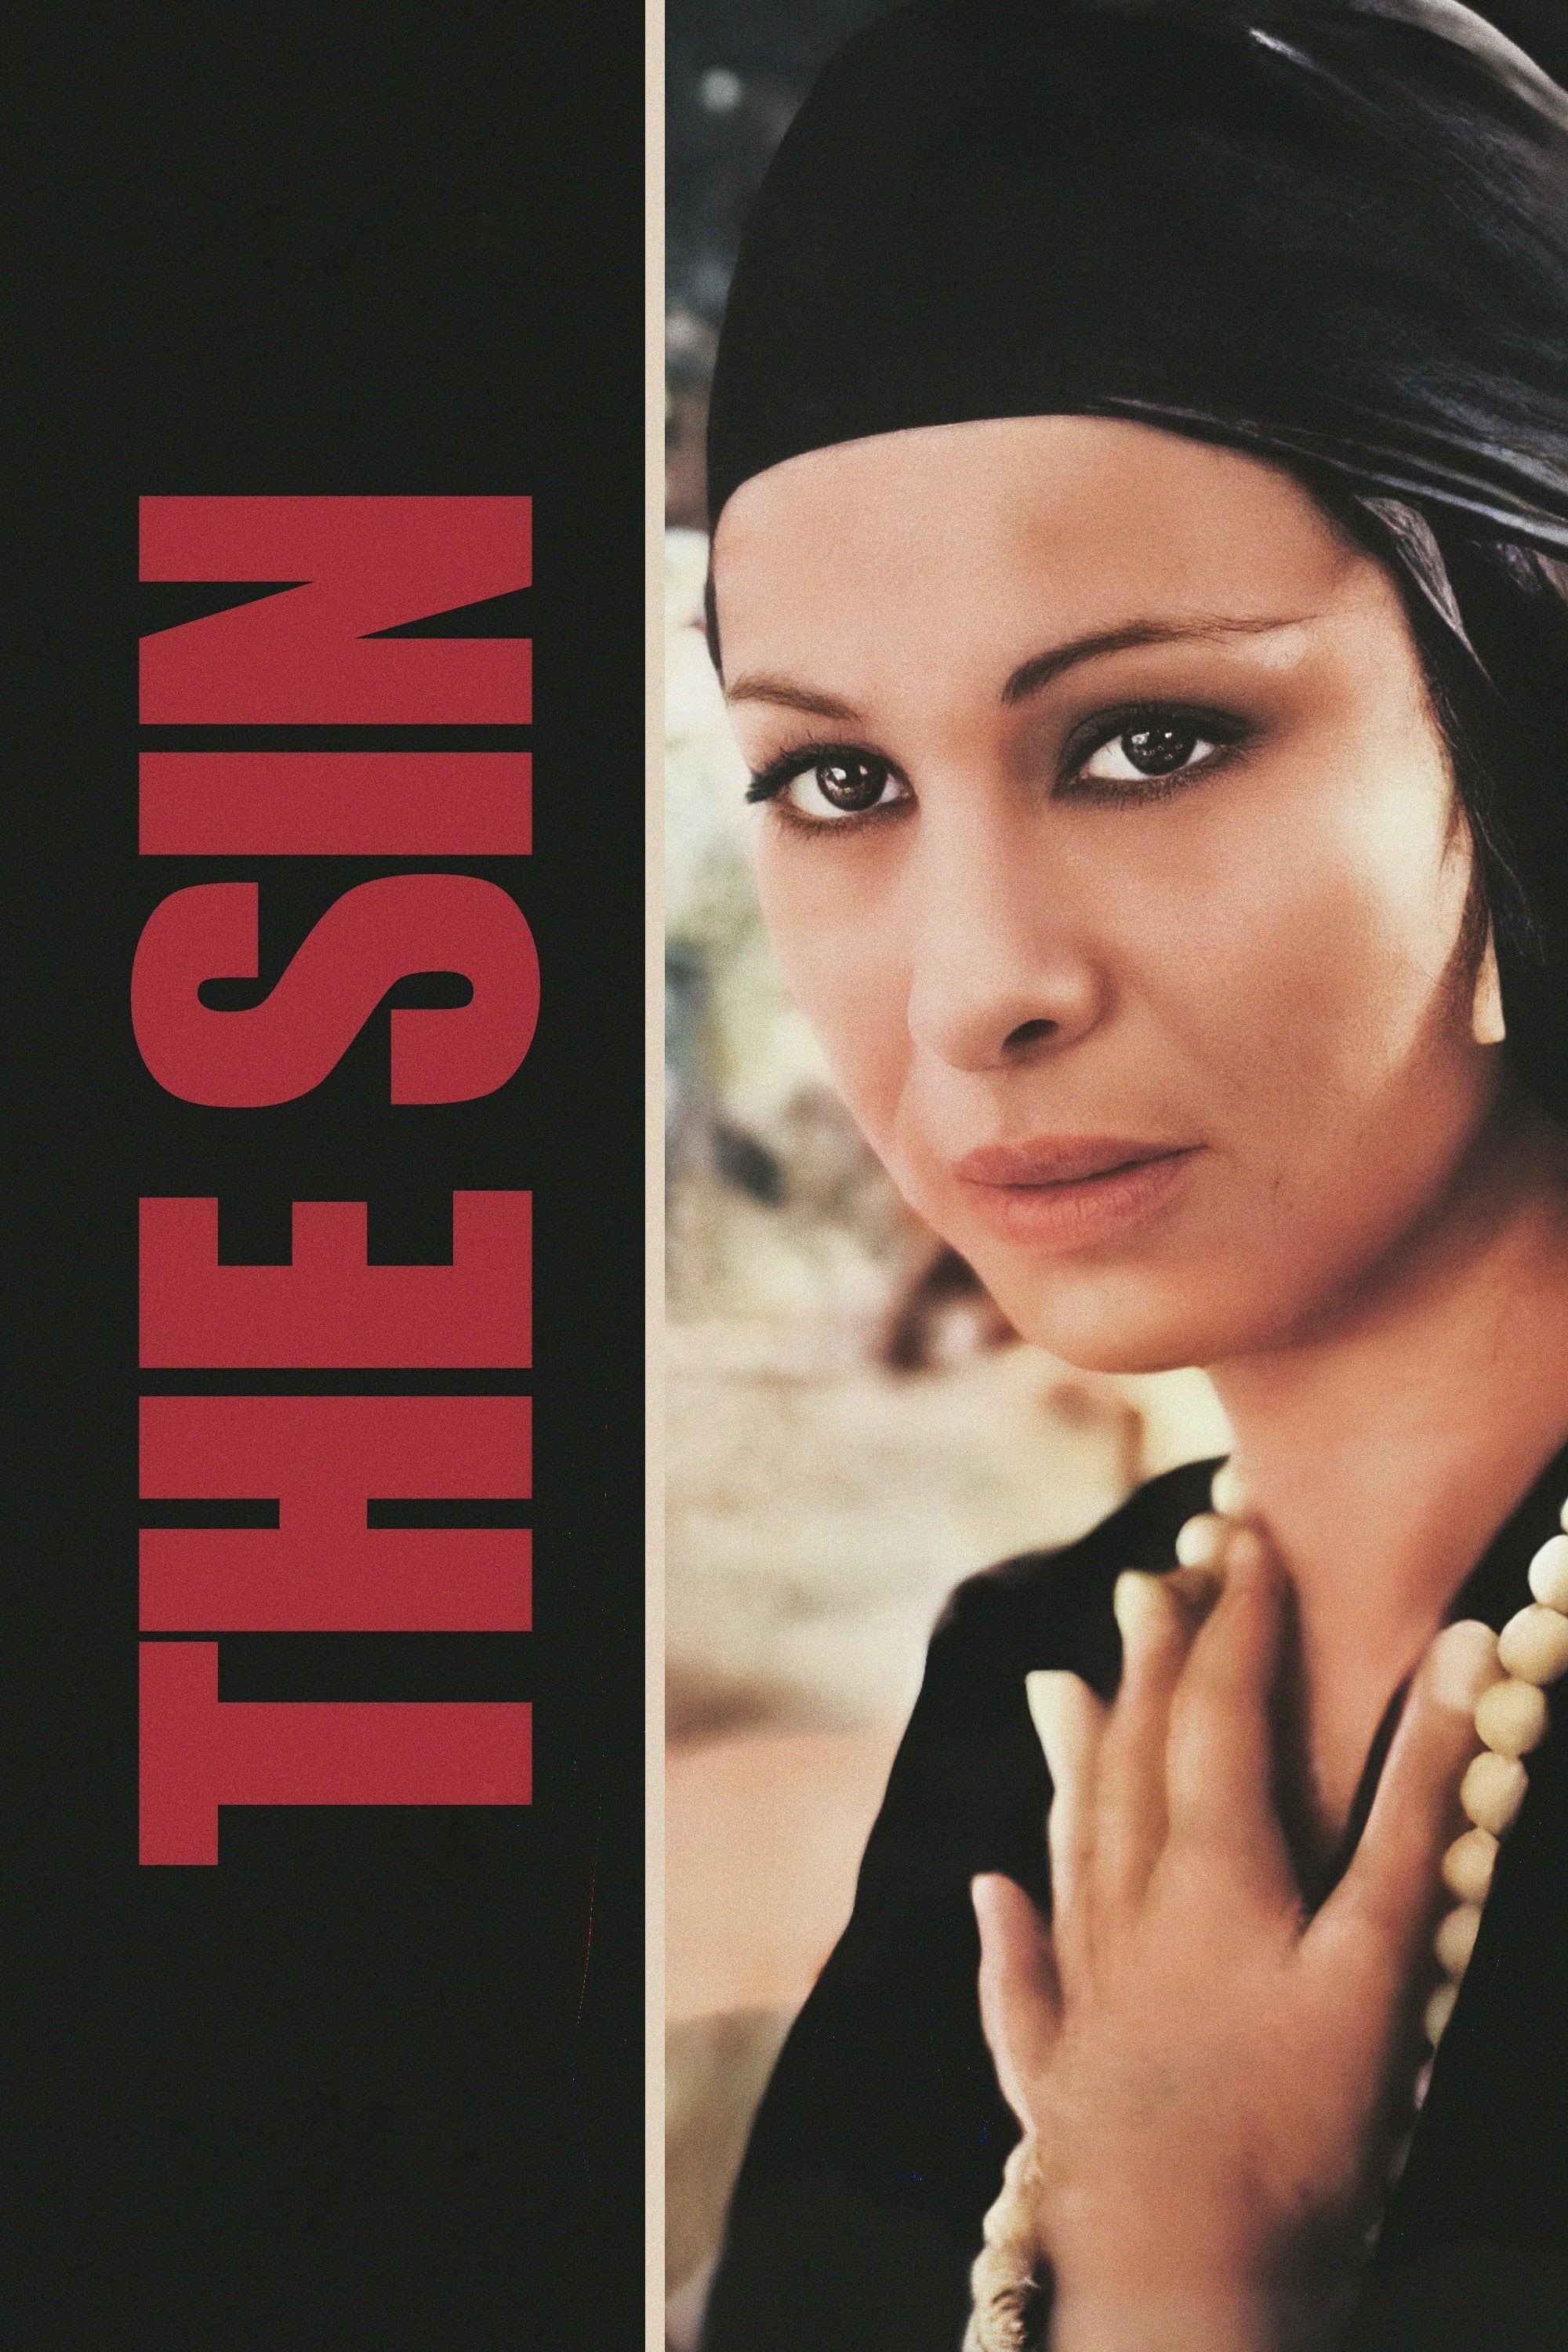 The Sin poster